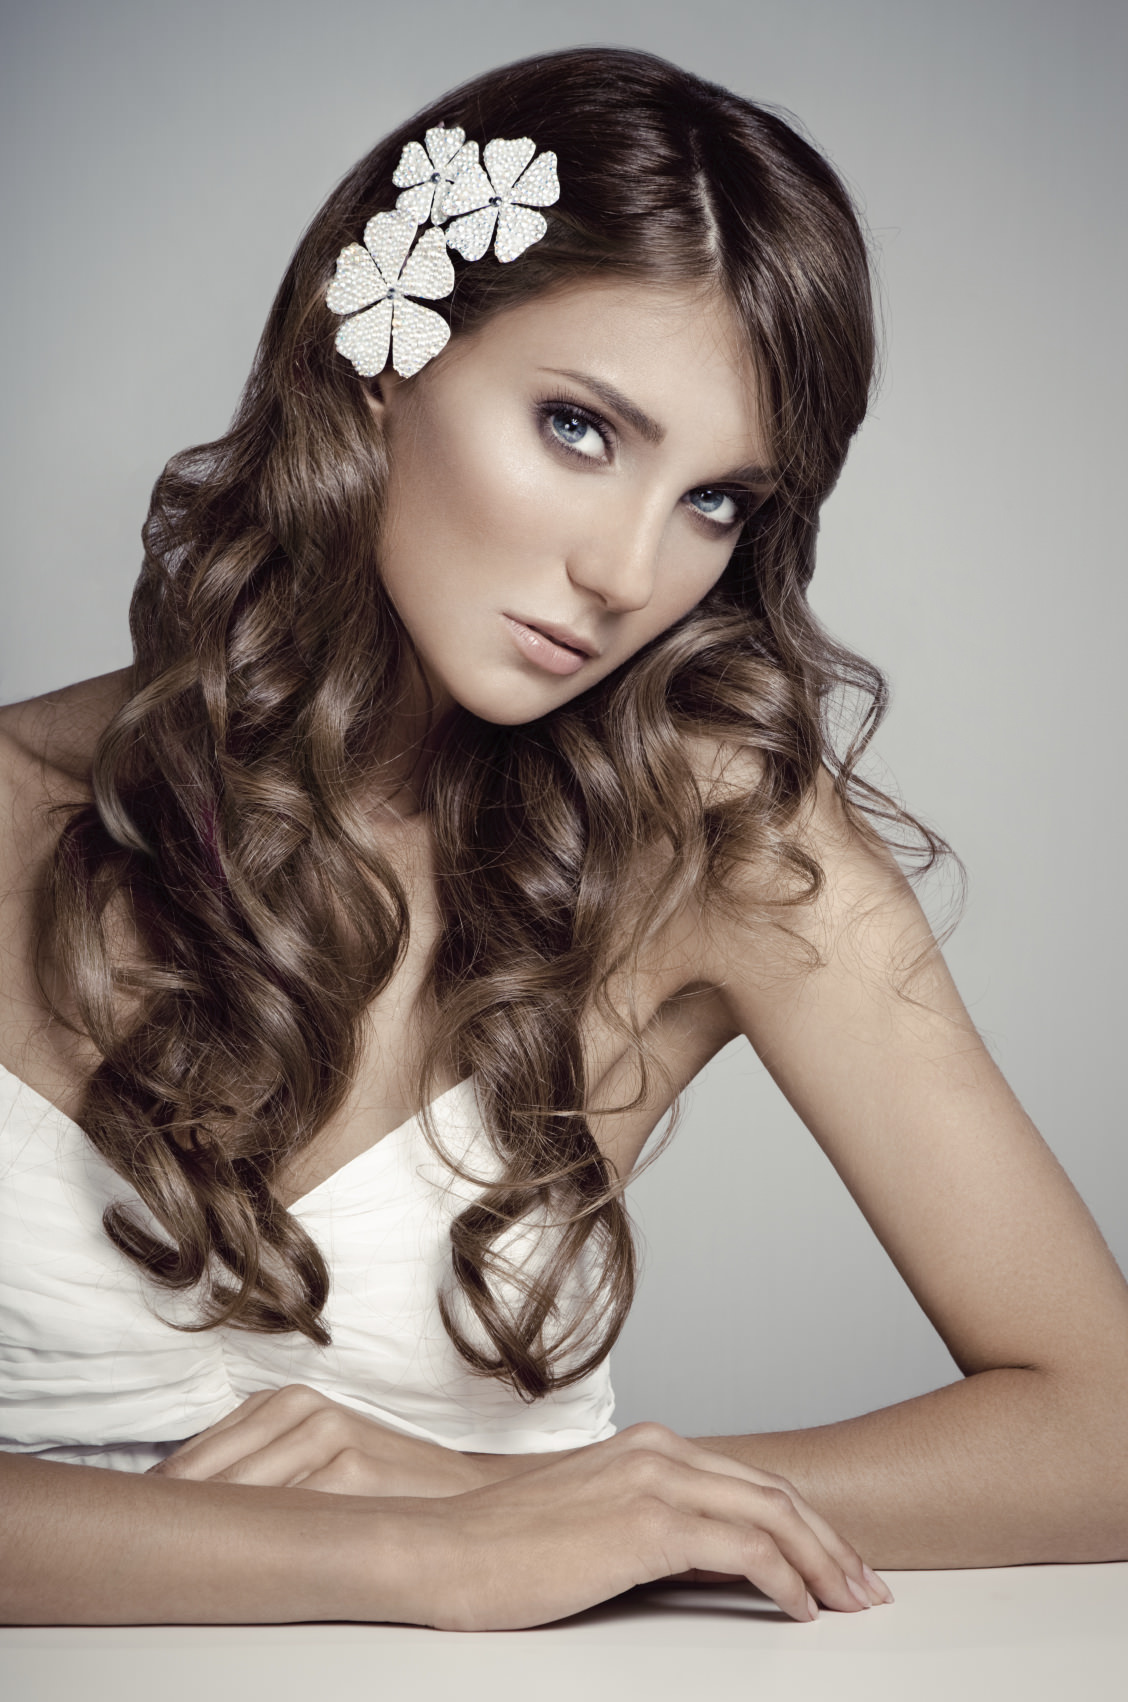 Beauty portrait of young fashion model wearing hair accessory, looking at camera. Professional make-up and hairstyle, gray background